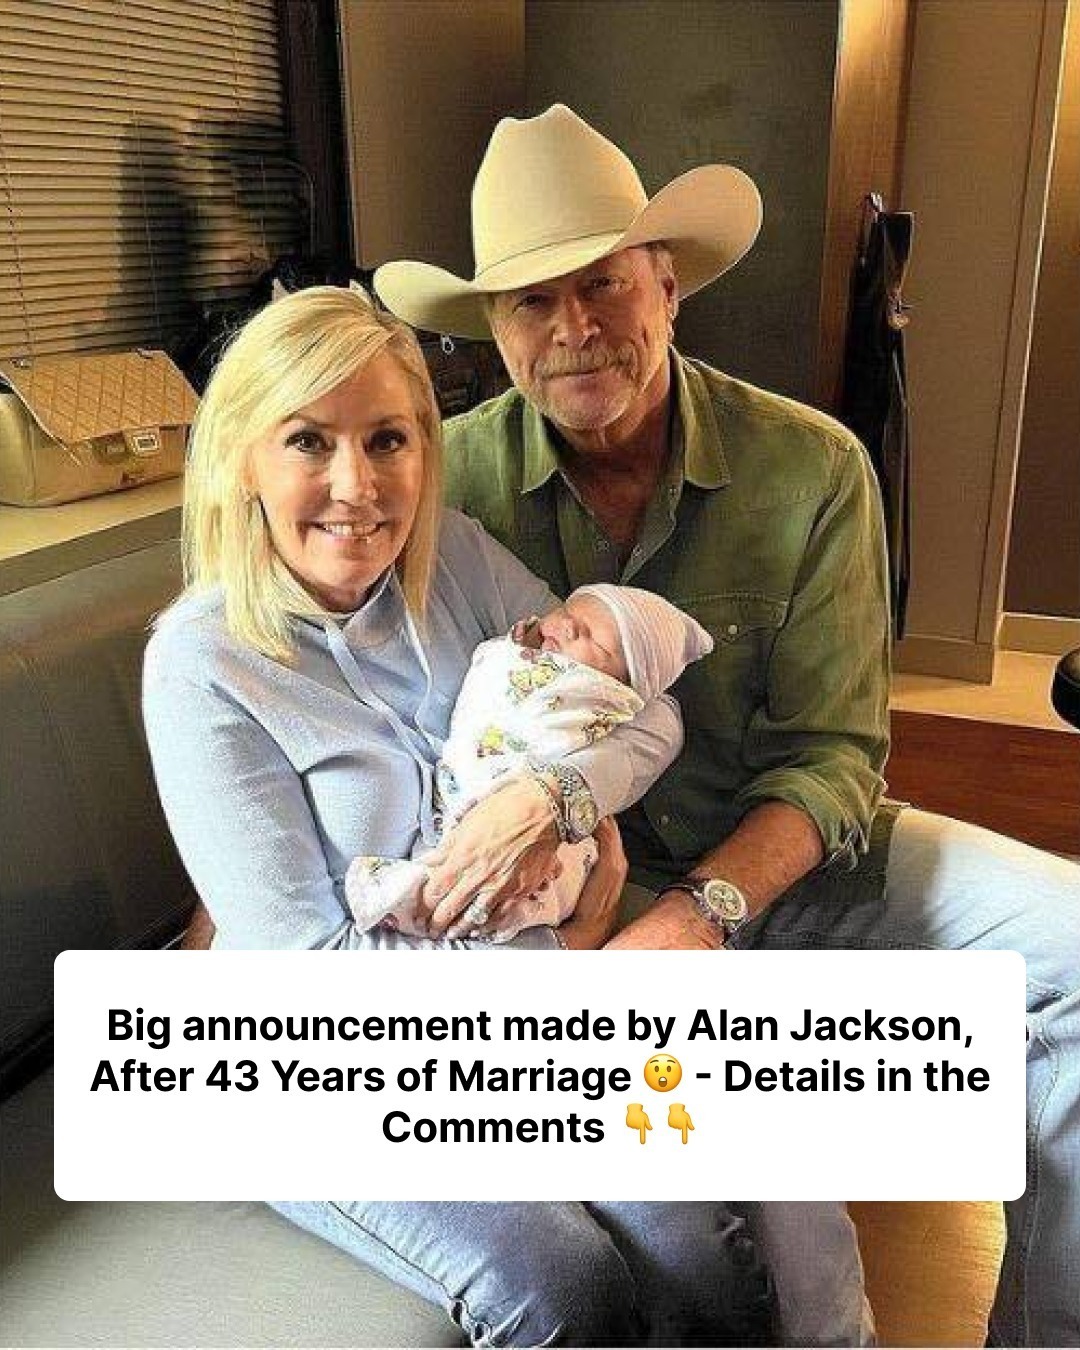 Alan Jackson makes a significant announcement after 43 years of ...